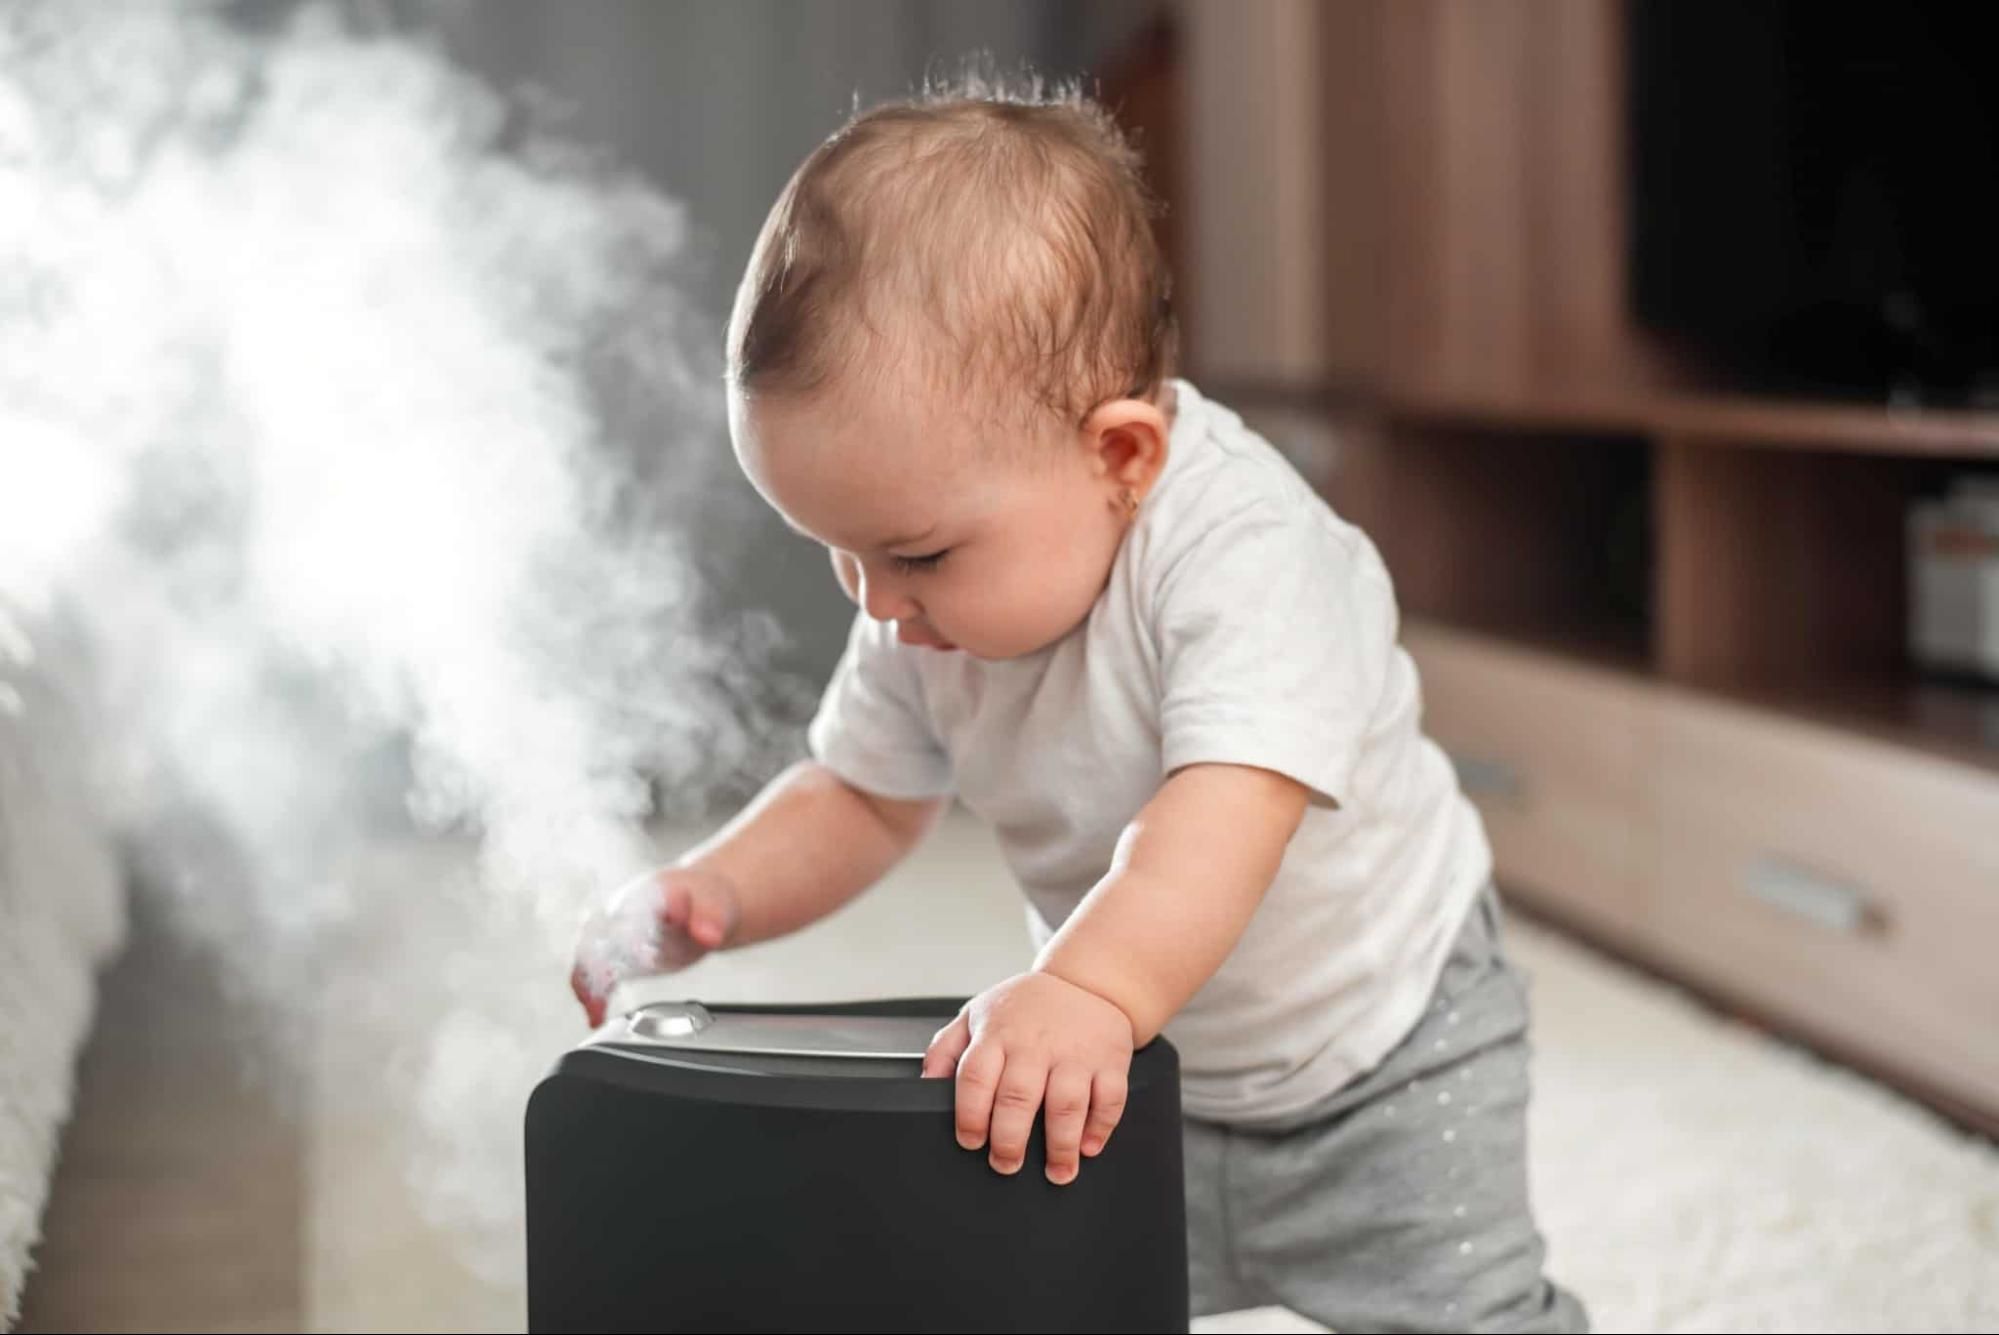 What Preventive Measures You Should Take When Using Humidifier For Cough